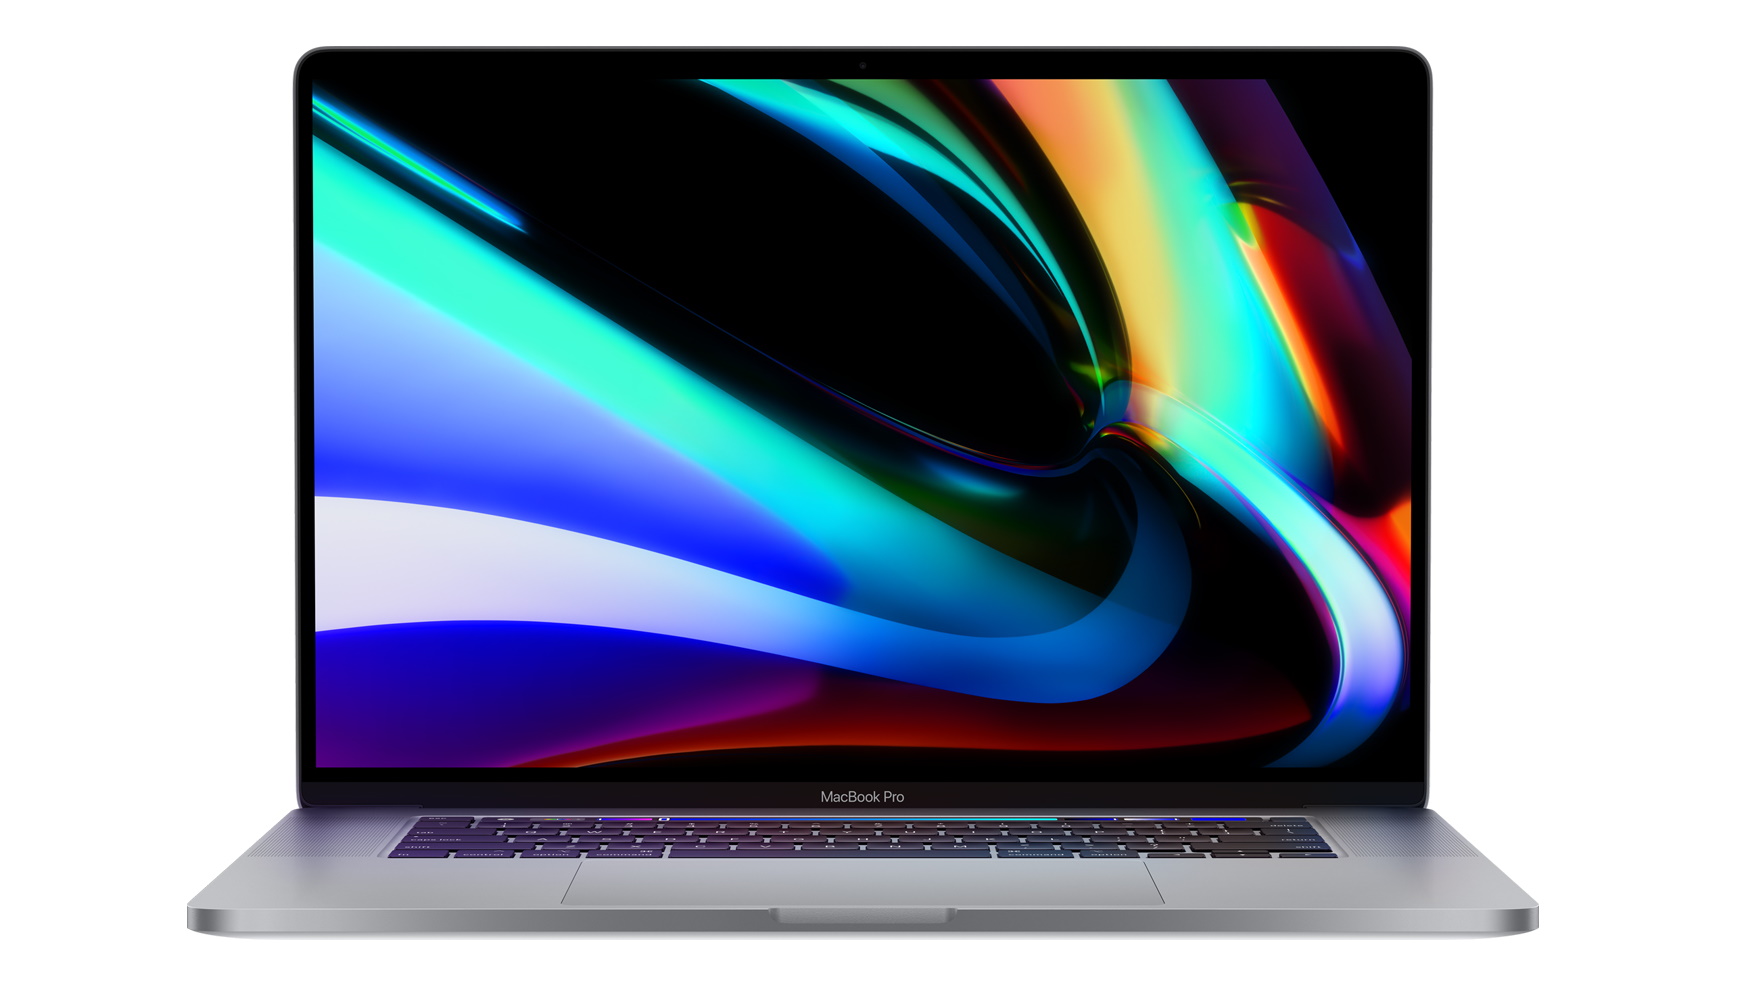 MacBook Pro 16inch is real and available to order today TechRadar